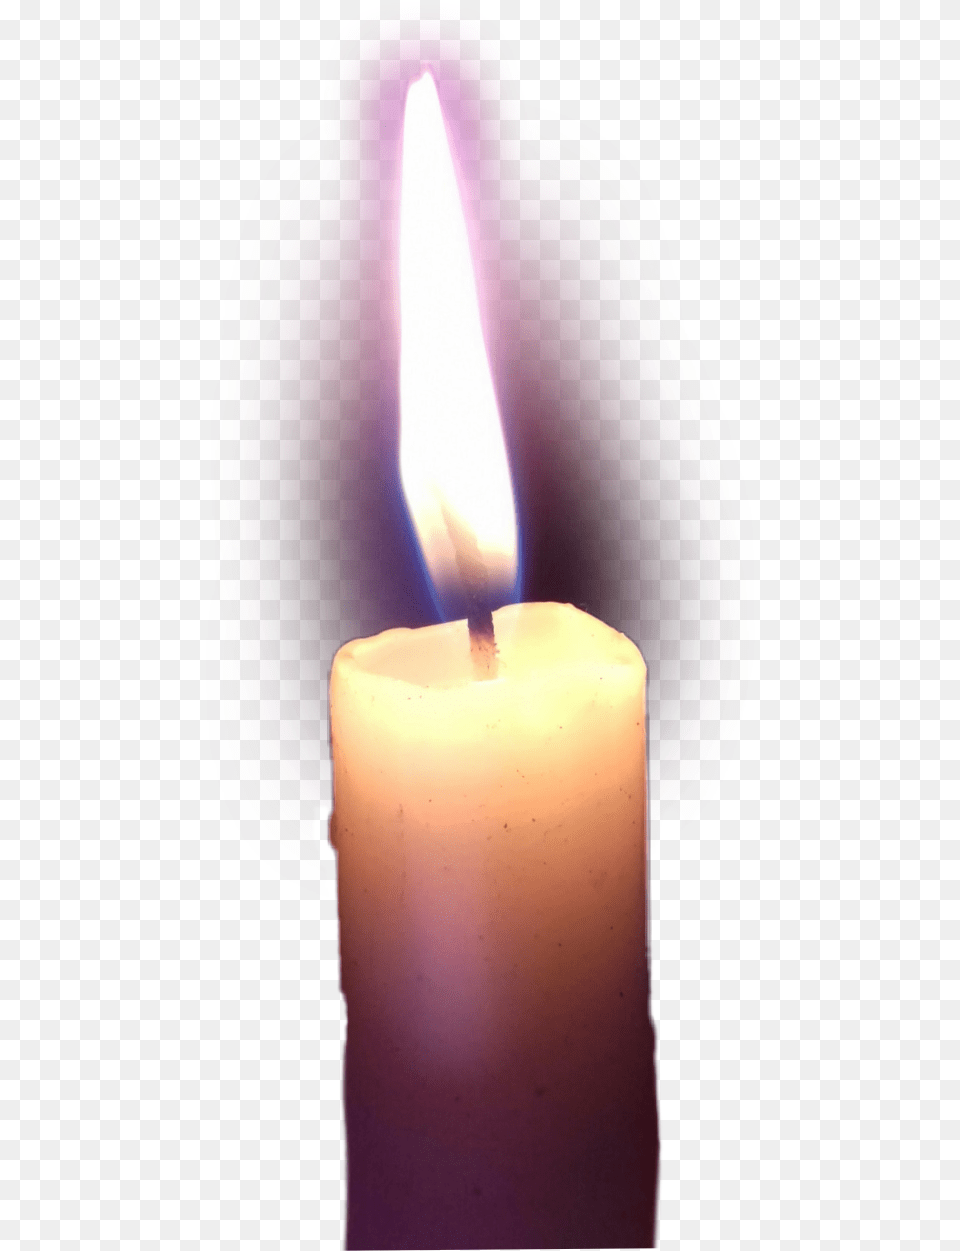 Candle Flame Lit Dark Light Made From The Artist Advent Candle, Fire Png Image